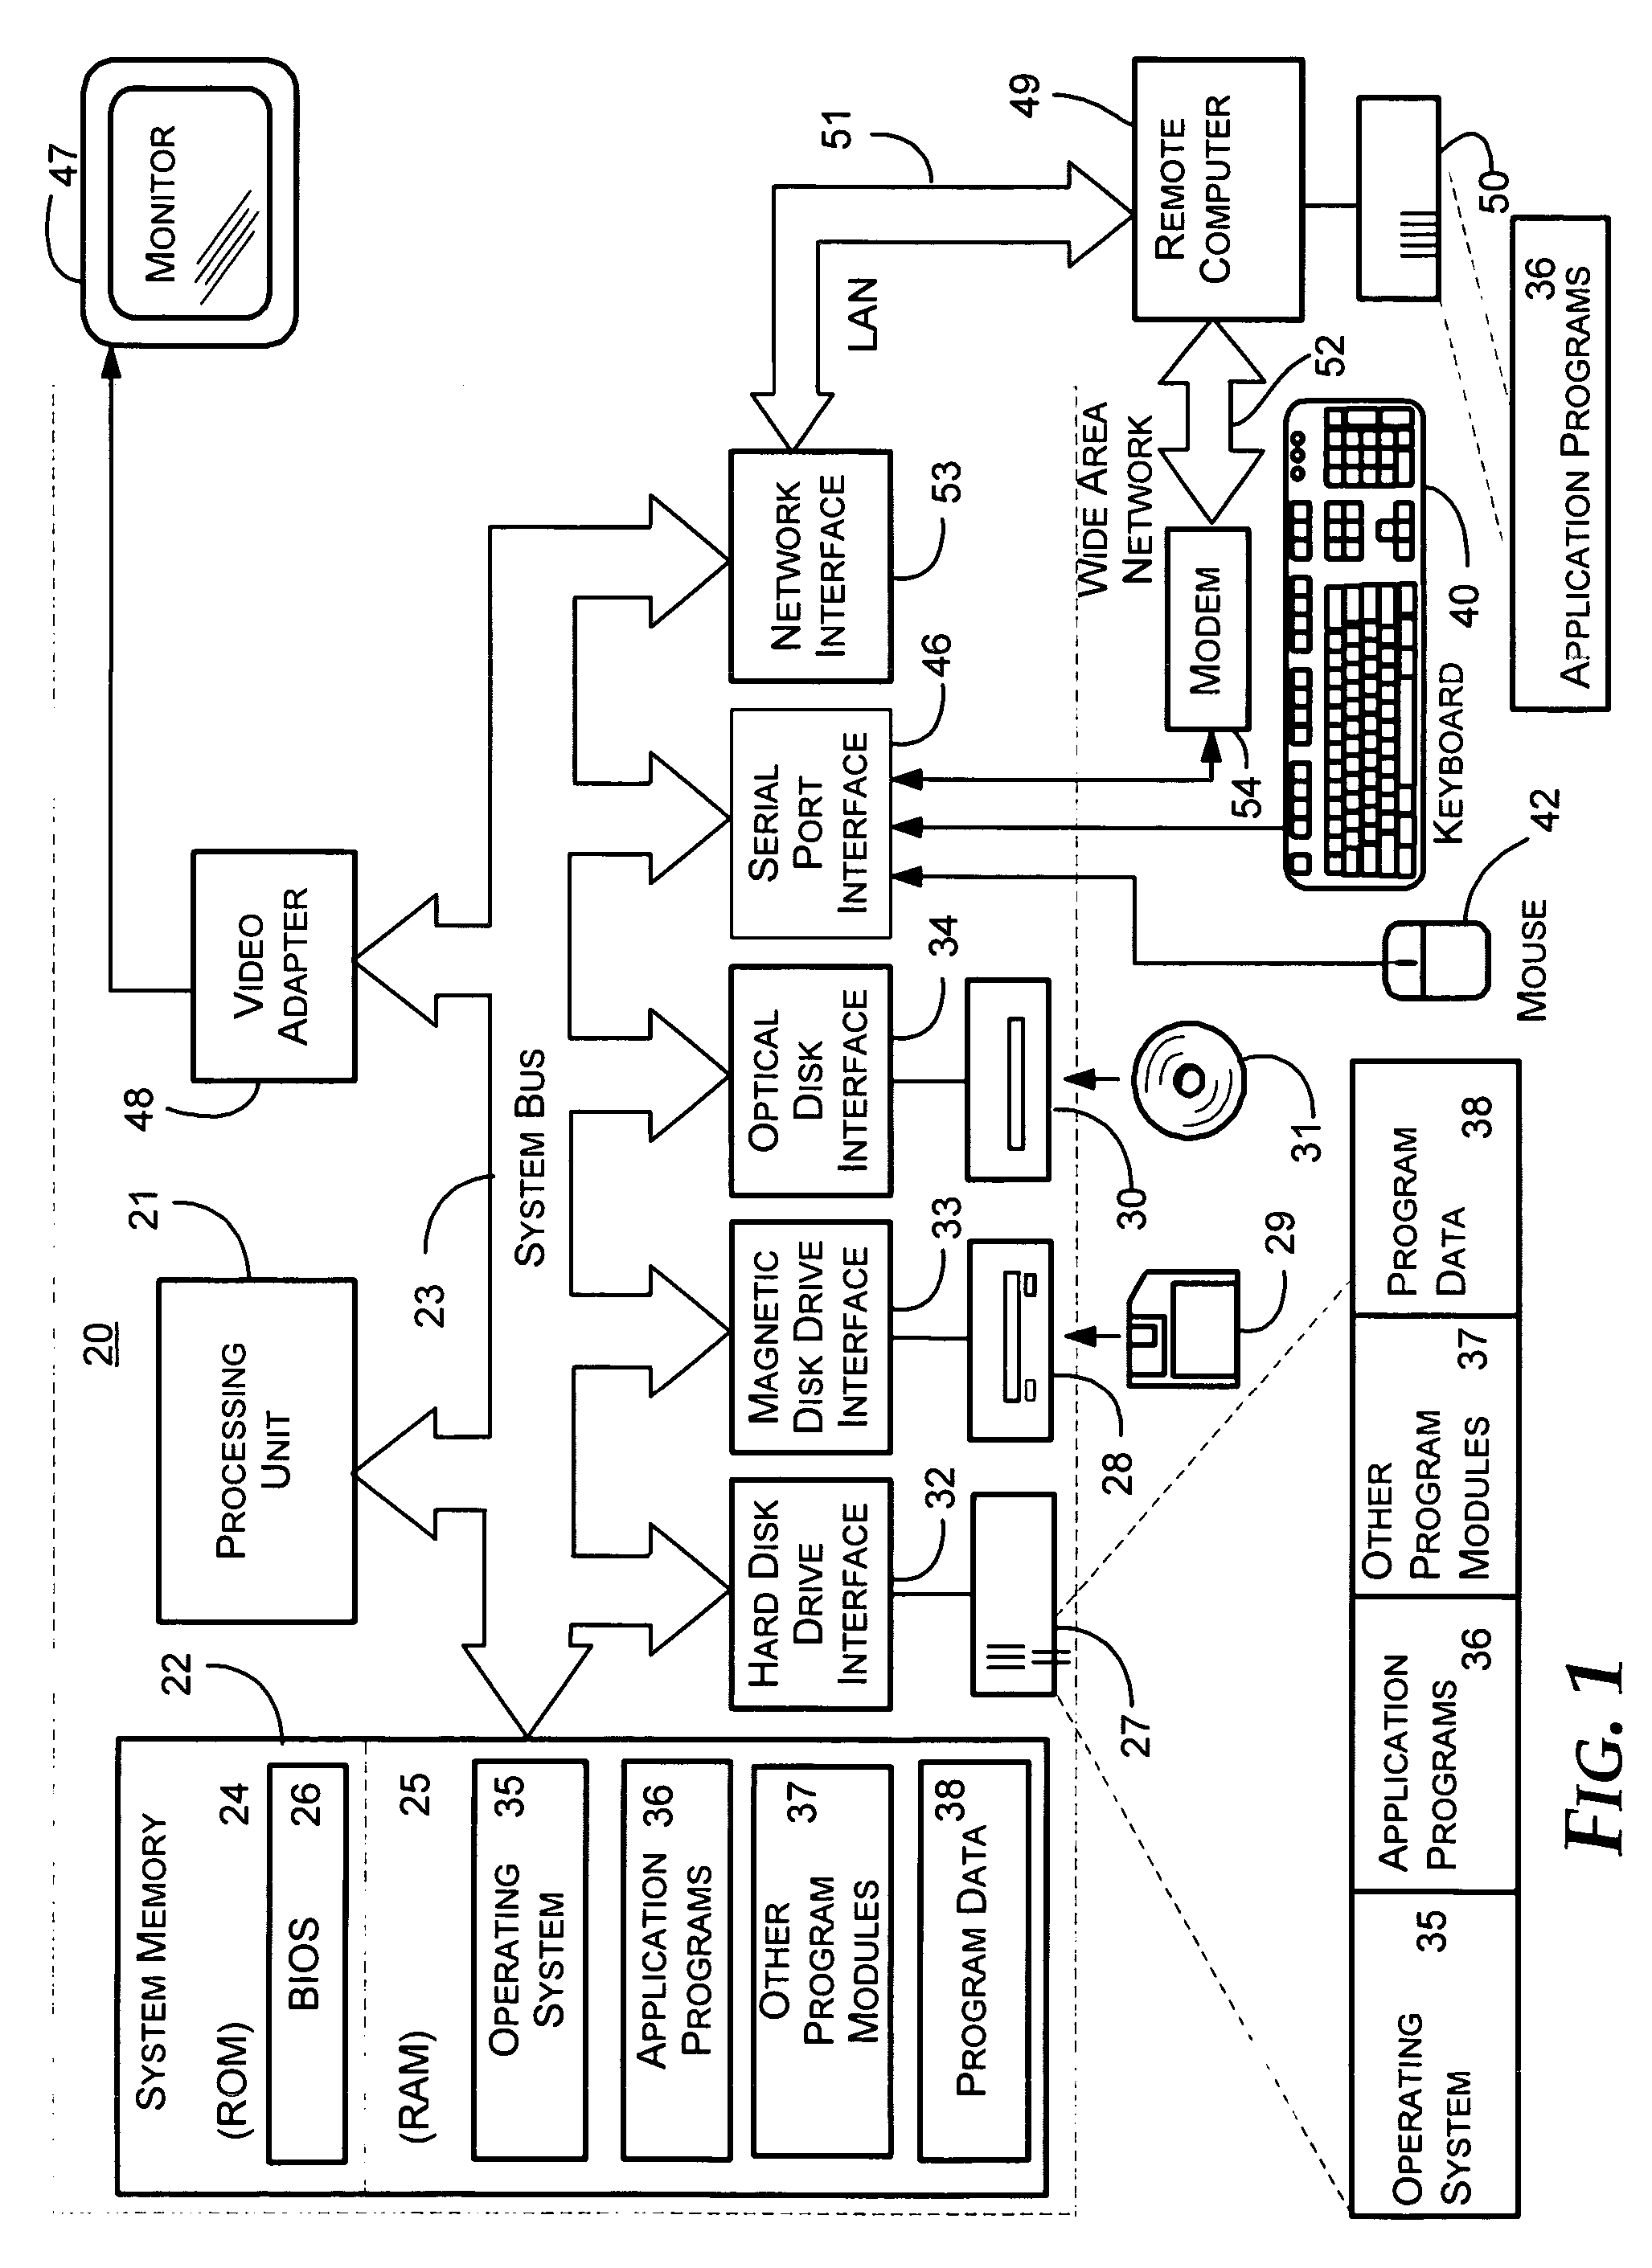 System and method for whole-system program analysis